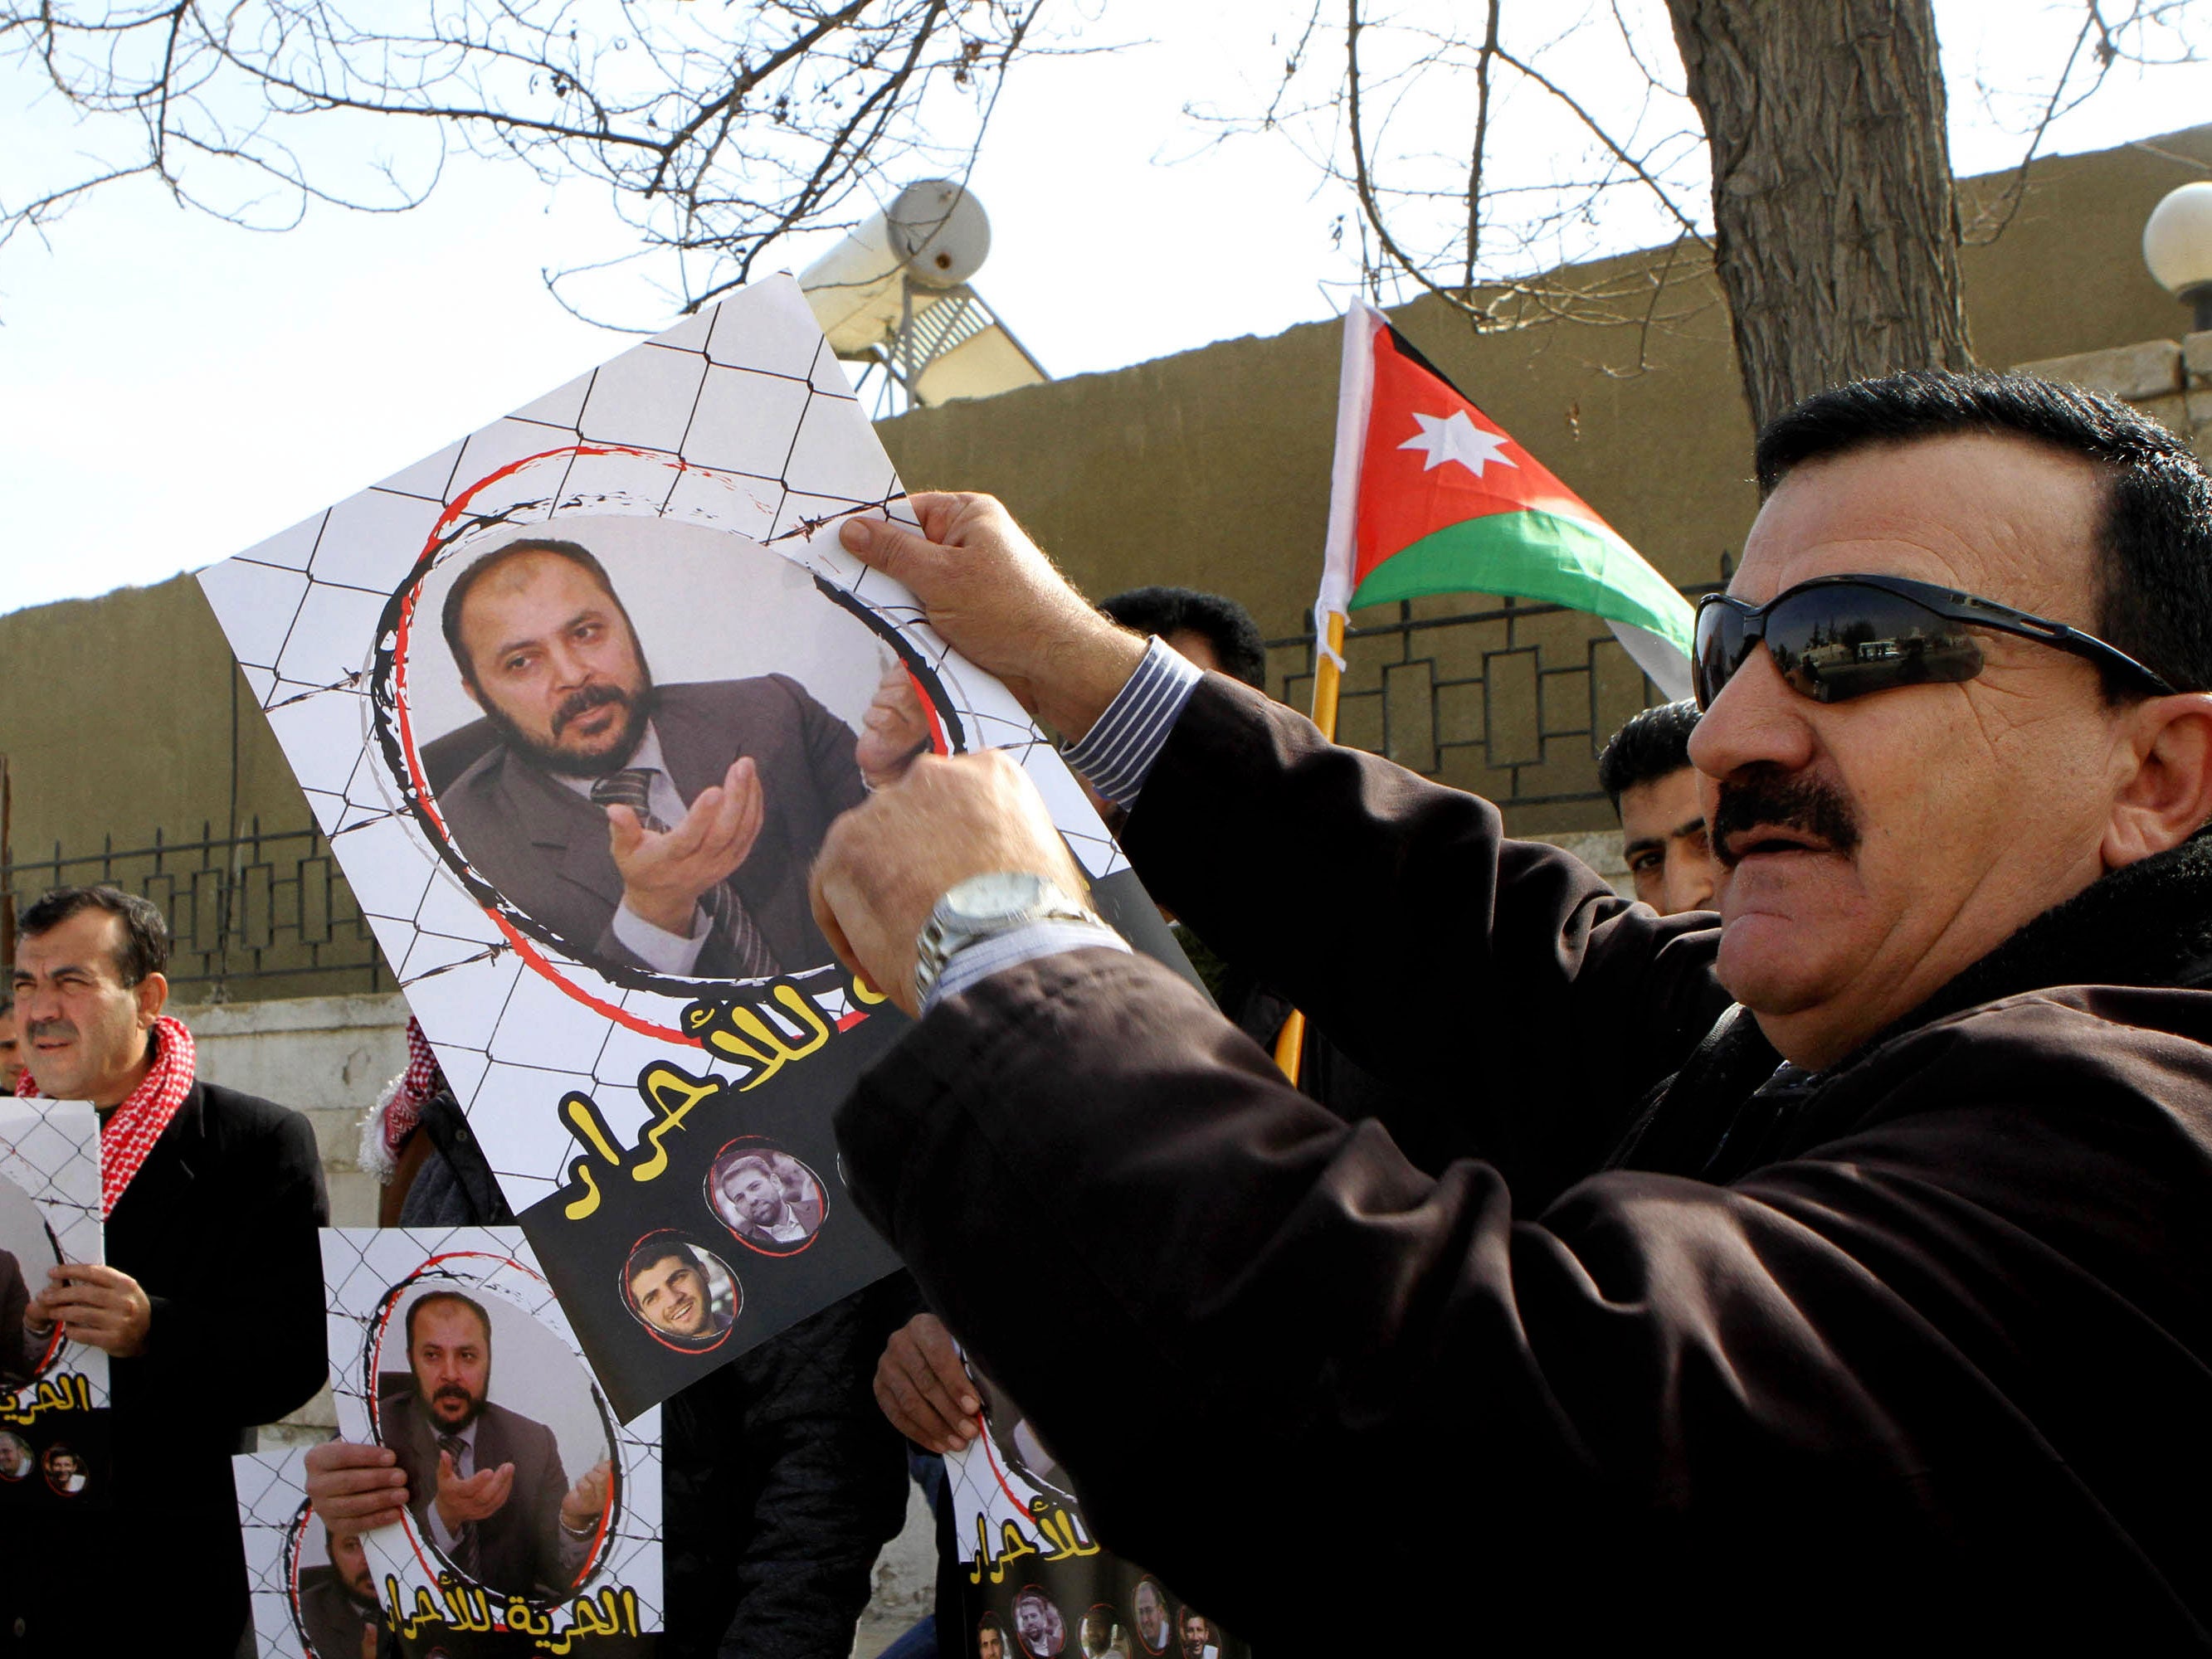 Supporters of Zaki Bani Ersheid, the number two in the Jordanian branch of the Brotherhood, hold photos of him, outside the state security court in Amman, Jordan